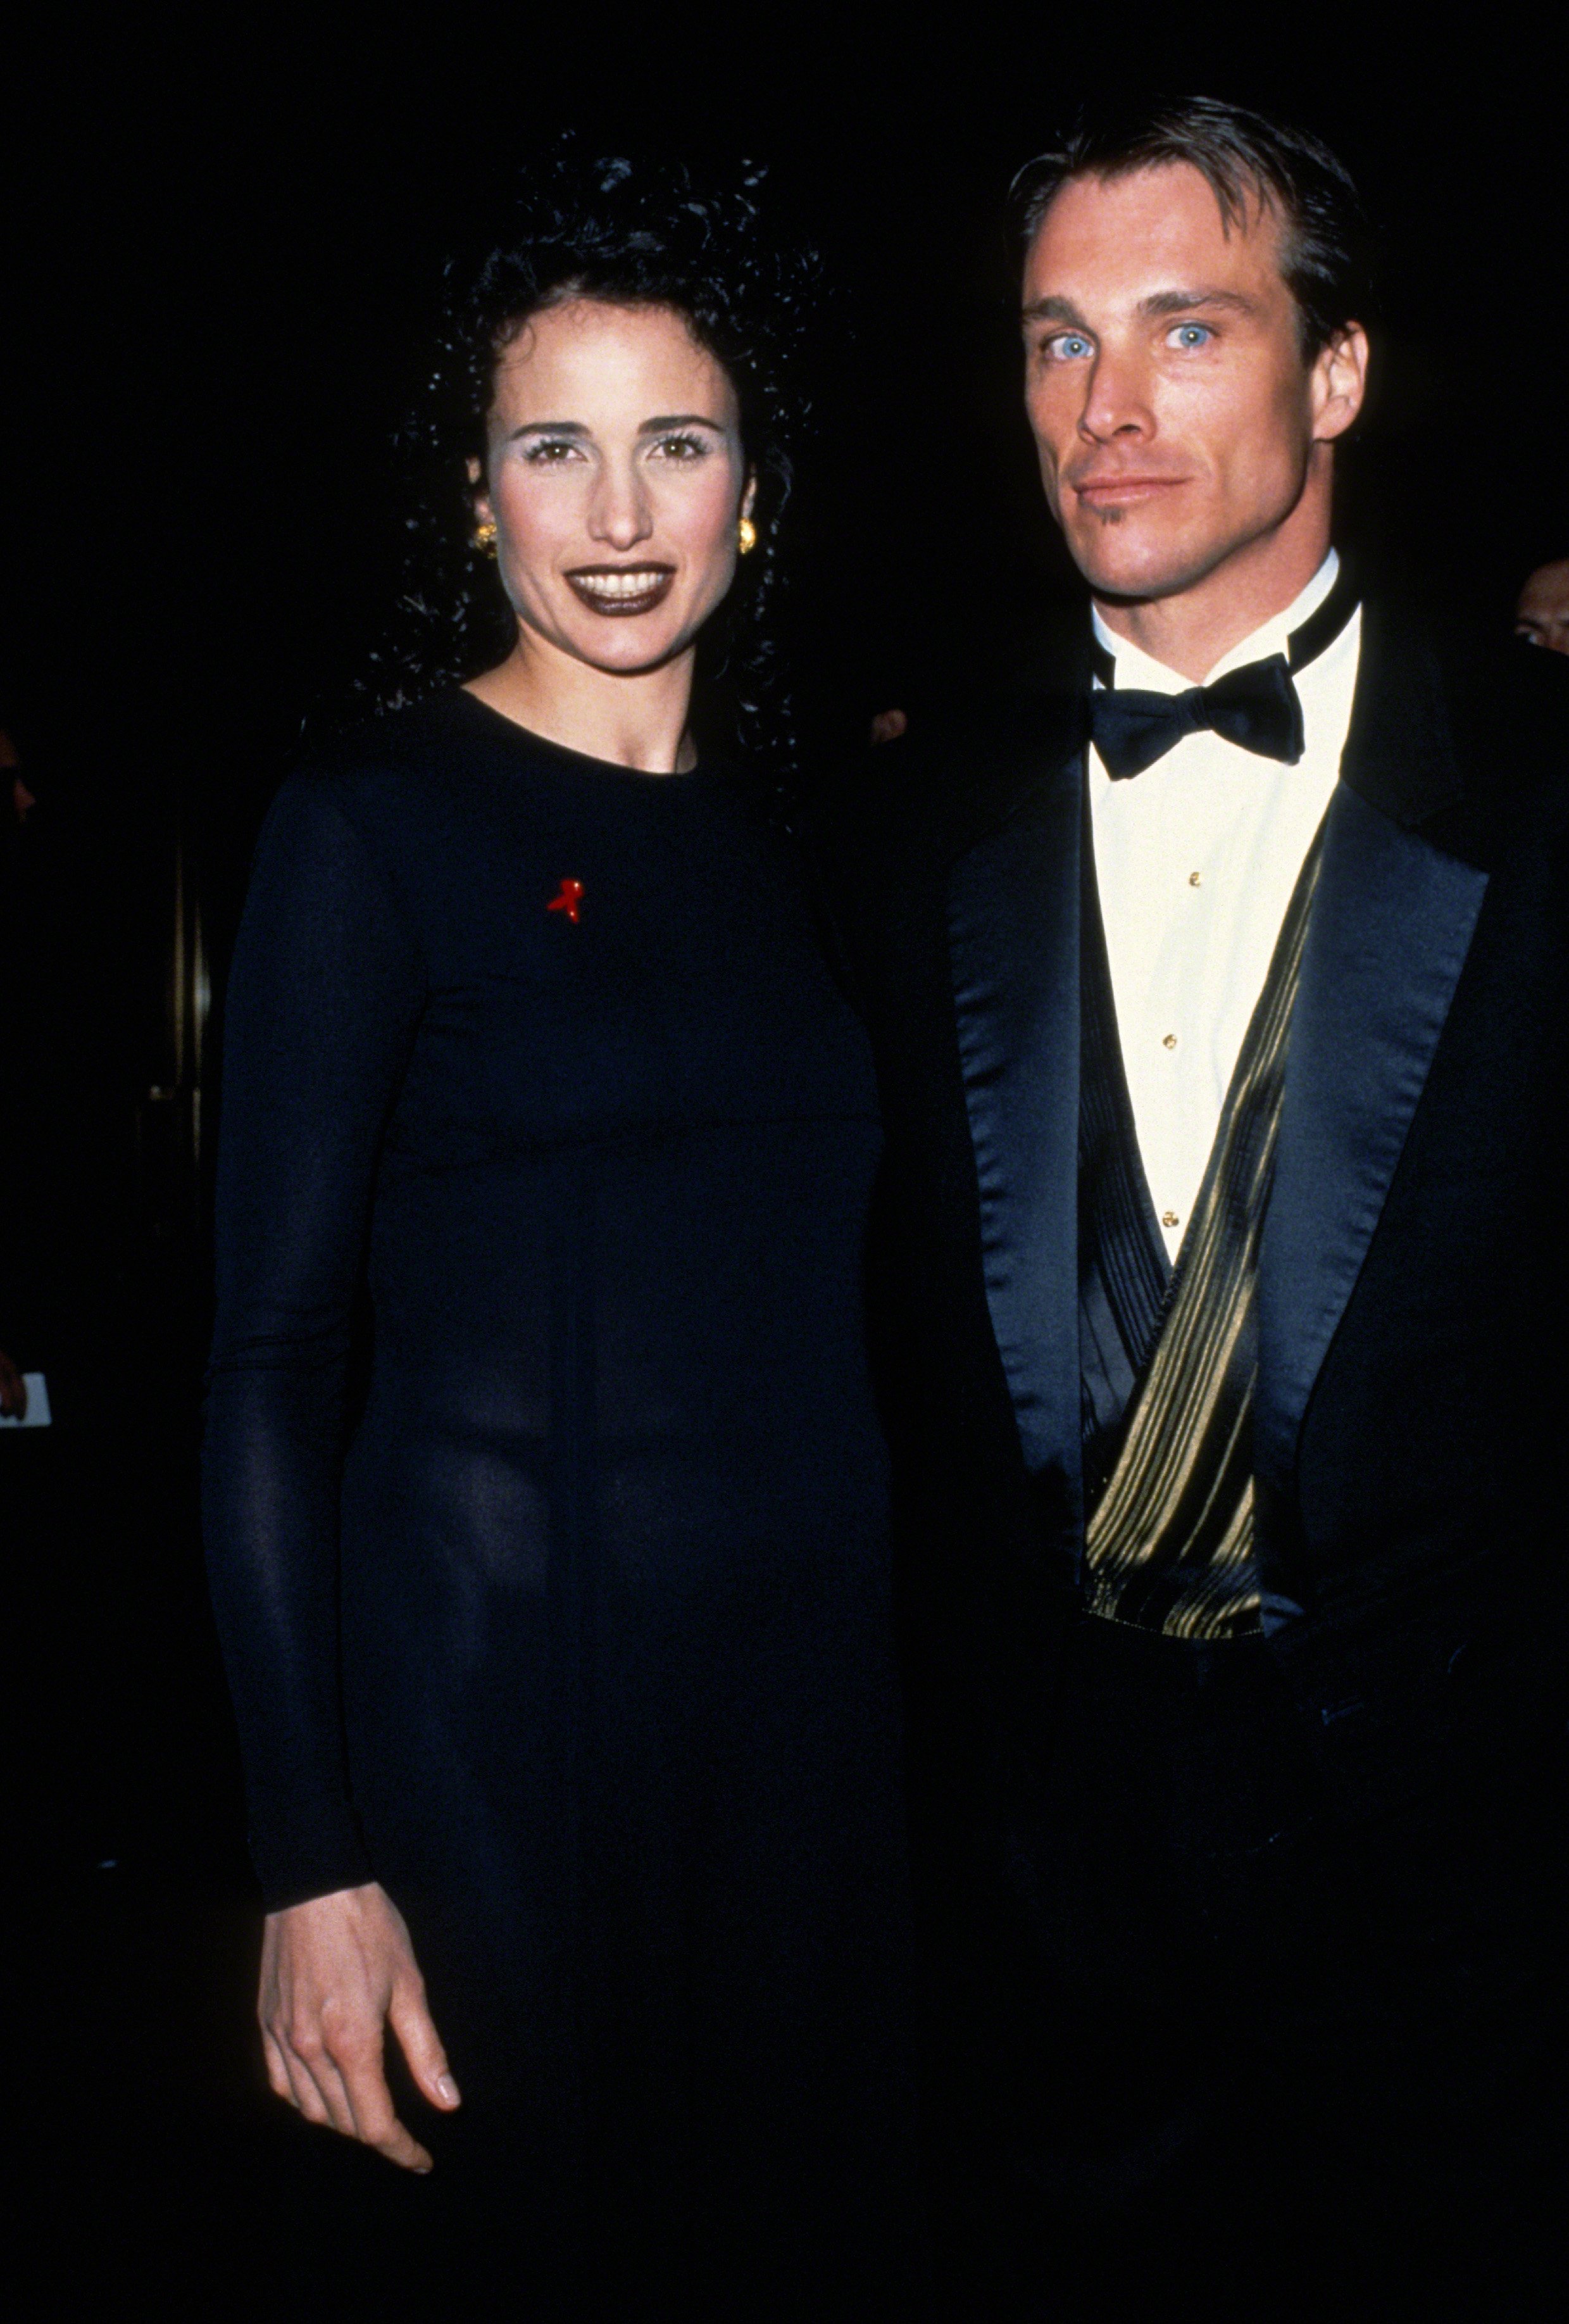 Andie MacDowell and Paul Qualley attending  the 12th Annual Council of Fashion Designers of America (CFDA) Awards at Lincoln Center in 1993 in New York City. | Source: Getty Images